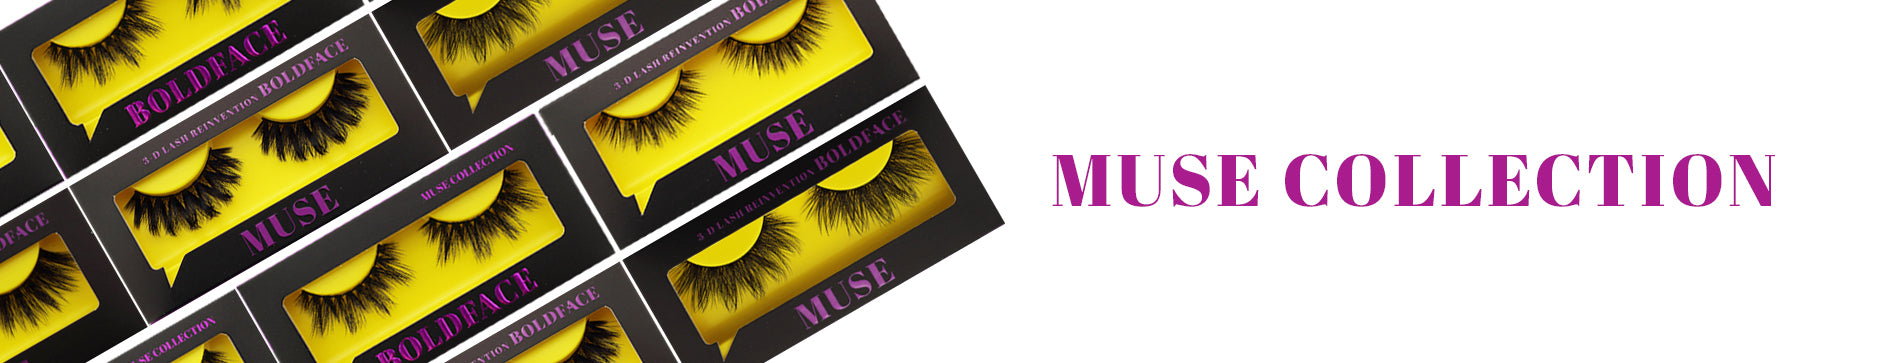 The Muse Collection